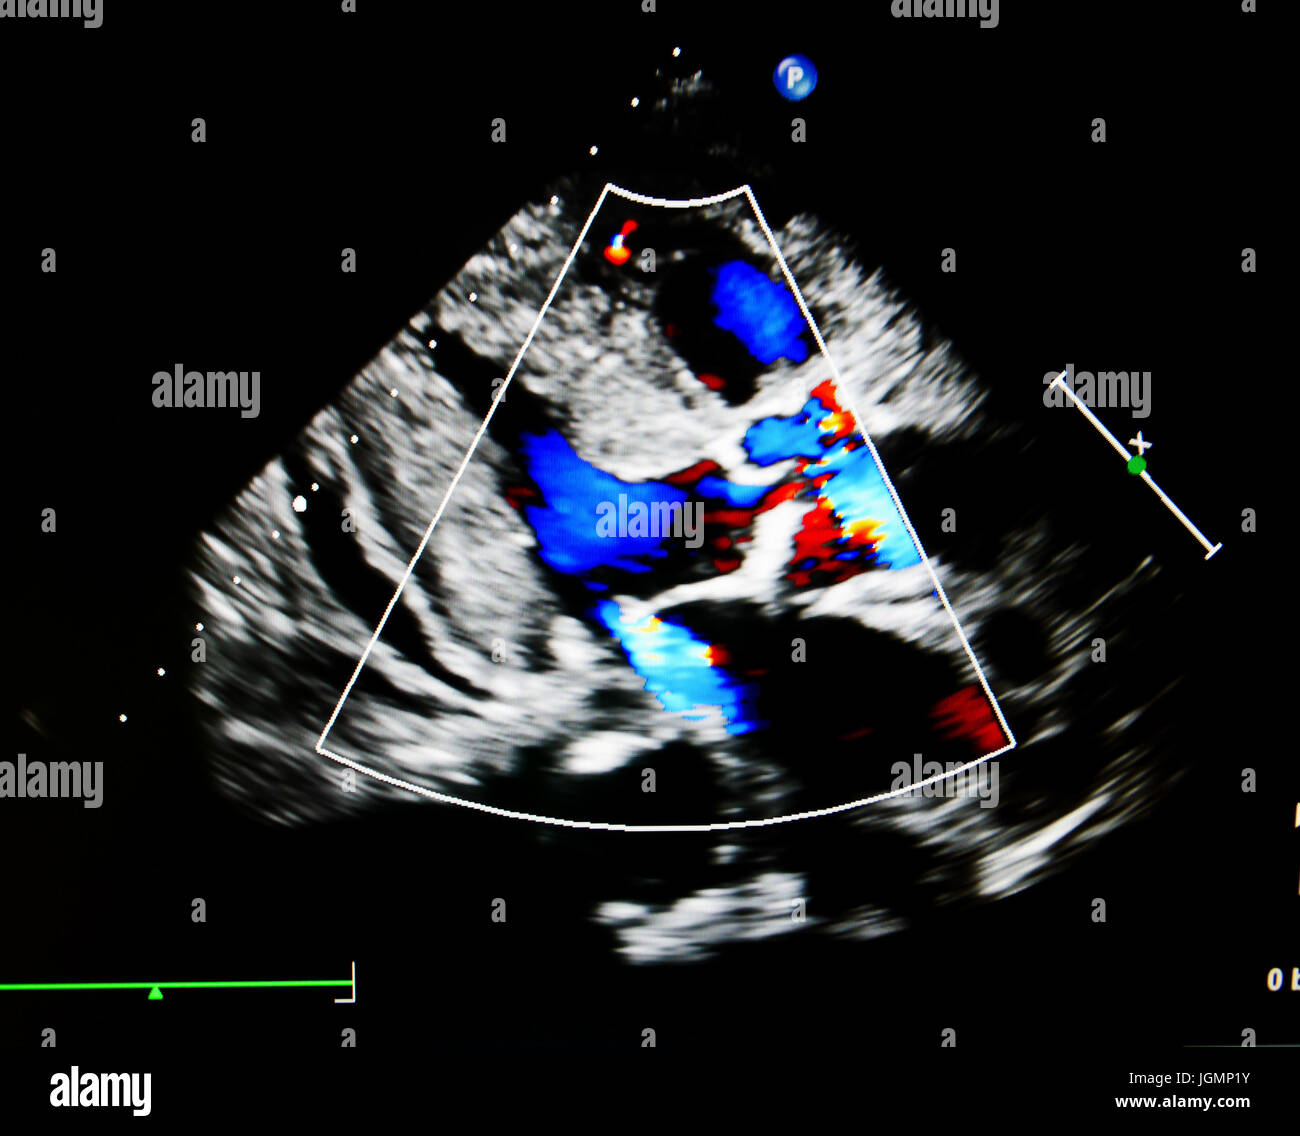 Flow color mode show jet from aortic and mitral valve regurgitation Stock Photo